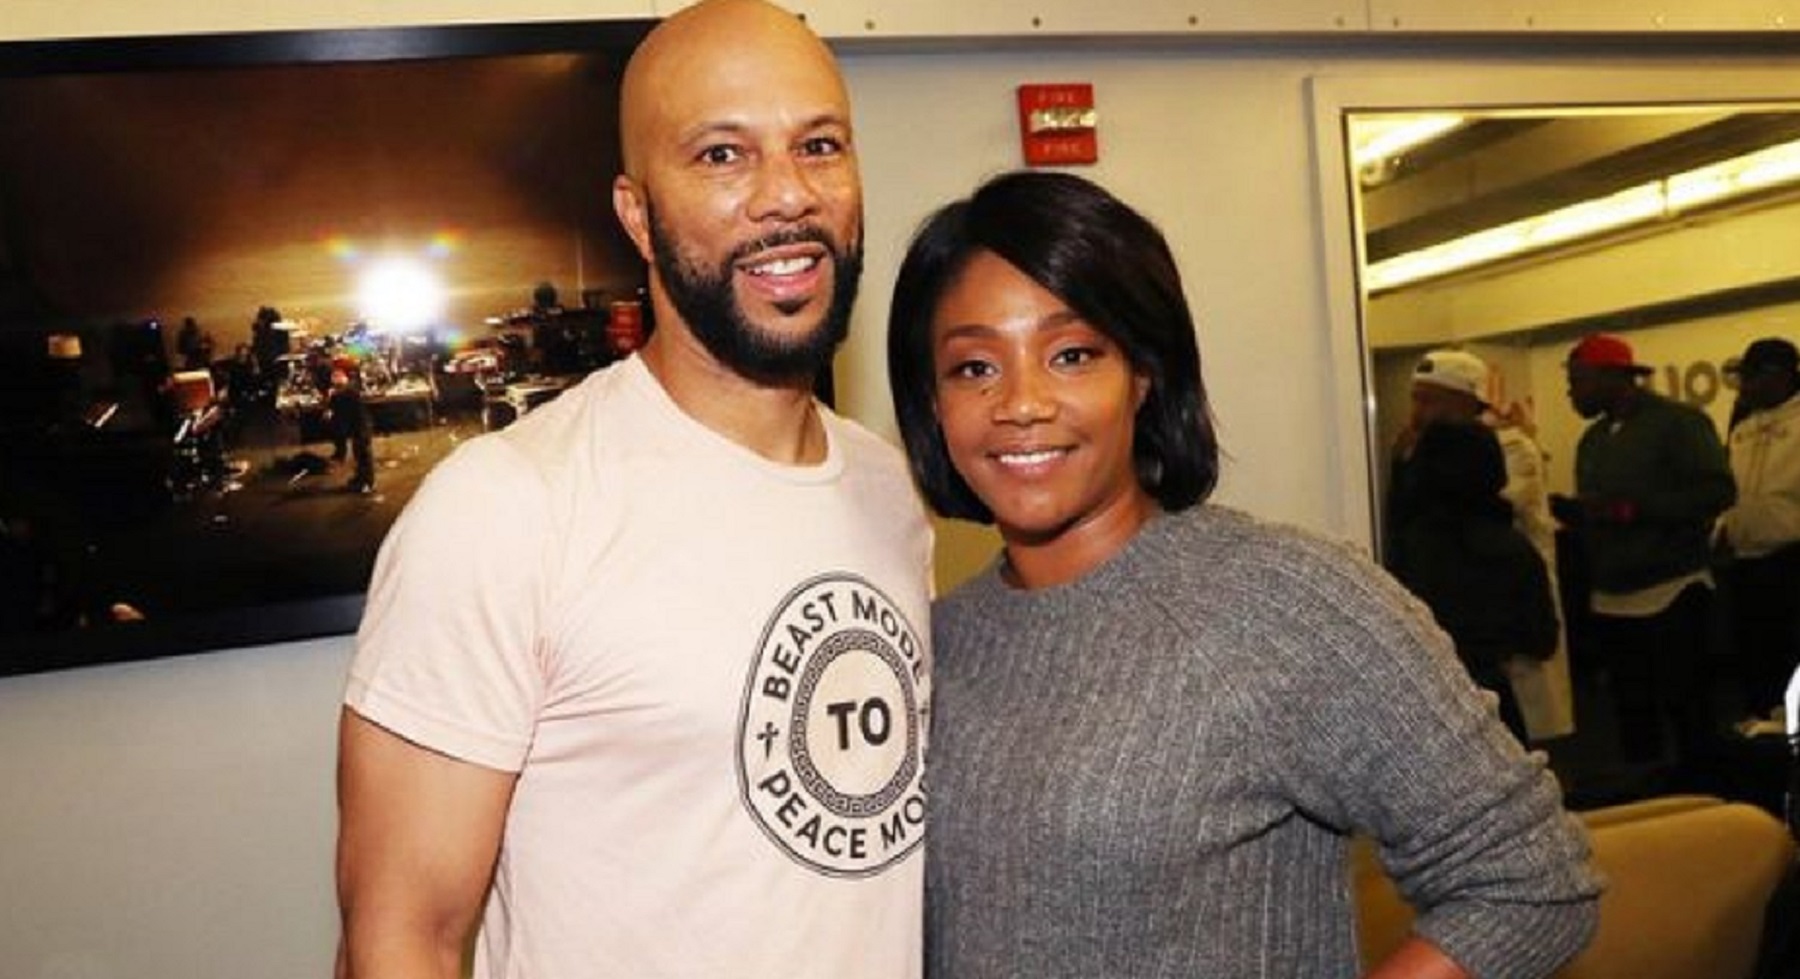 Common Talks About Relationship With Tiffany Haddish: “She’s a Queen… Grateful To Have Her In My Life”